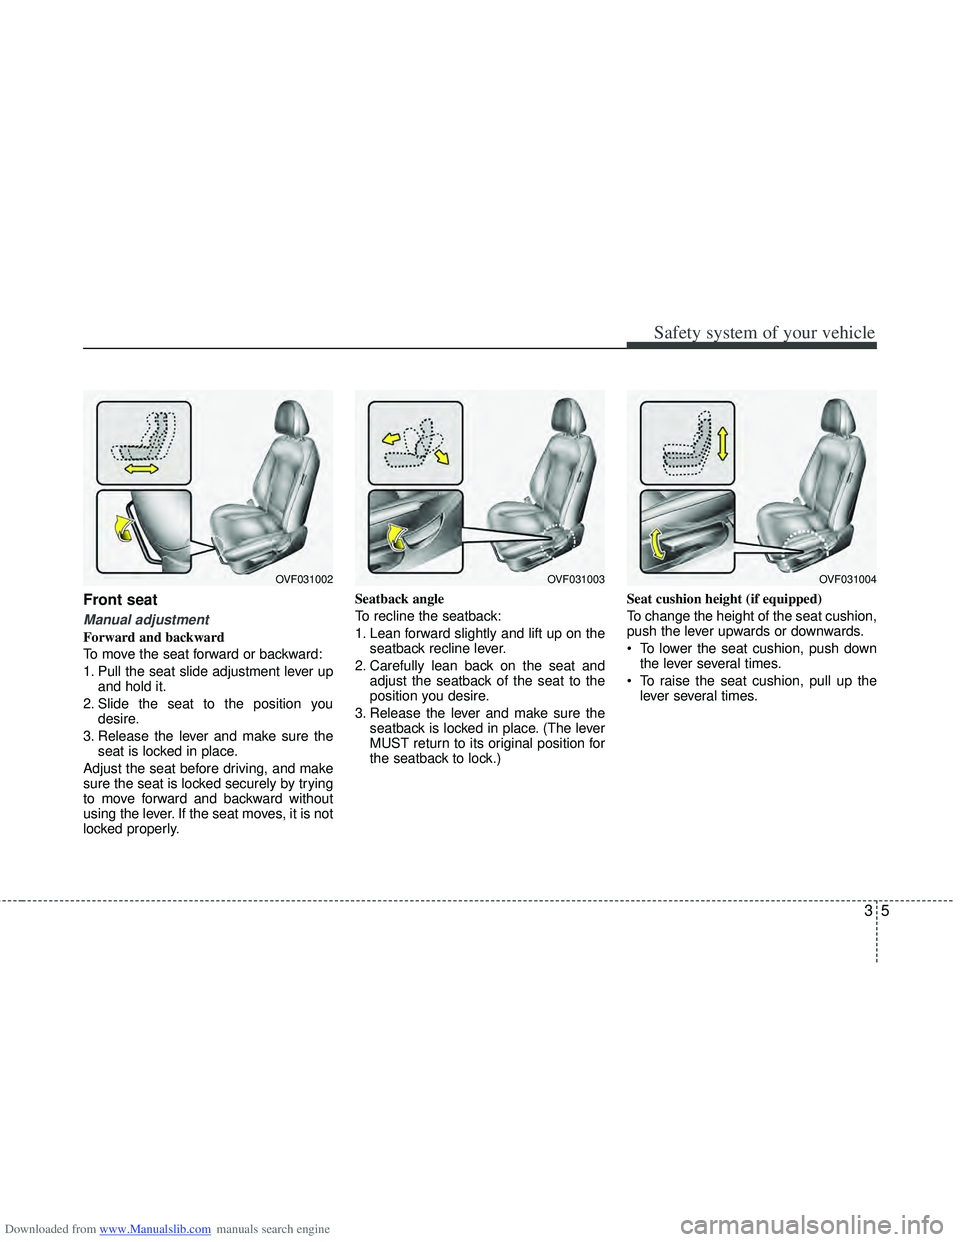 HYUNDAI I40 2011  Owners Manual Downloaded from www.Manualslib.com manuals search engine 35
Safety system of your vehicle
Front seat 
Manual adjustment 
Forward and backward
To move the seat forward or backward:
1. Pull the seat sli